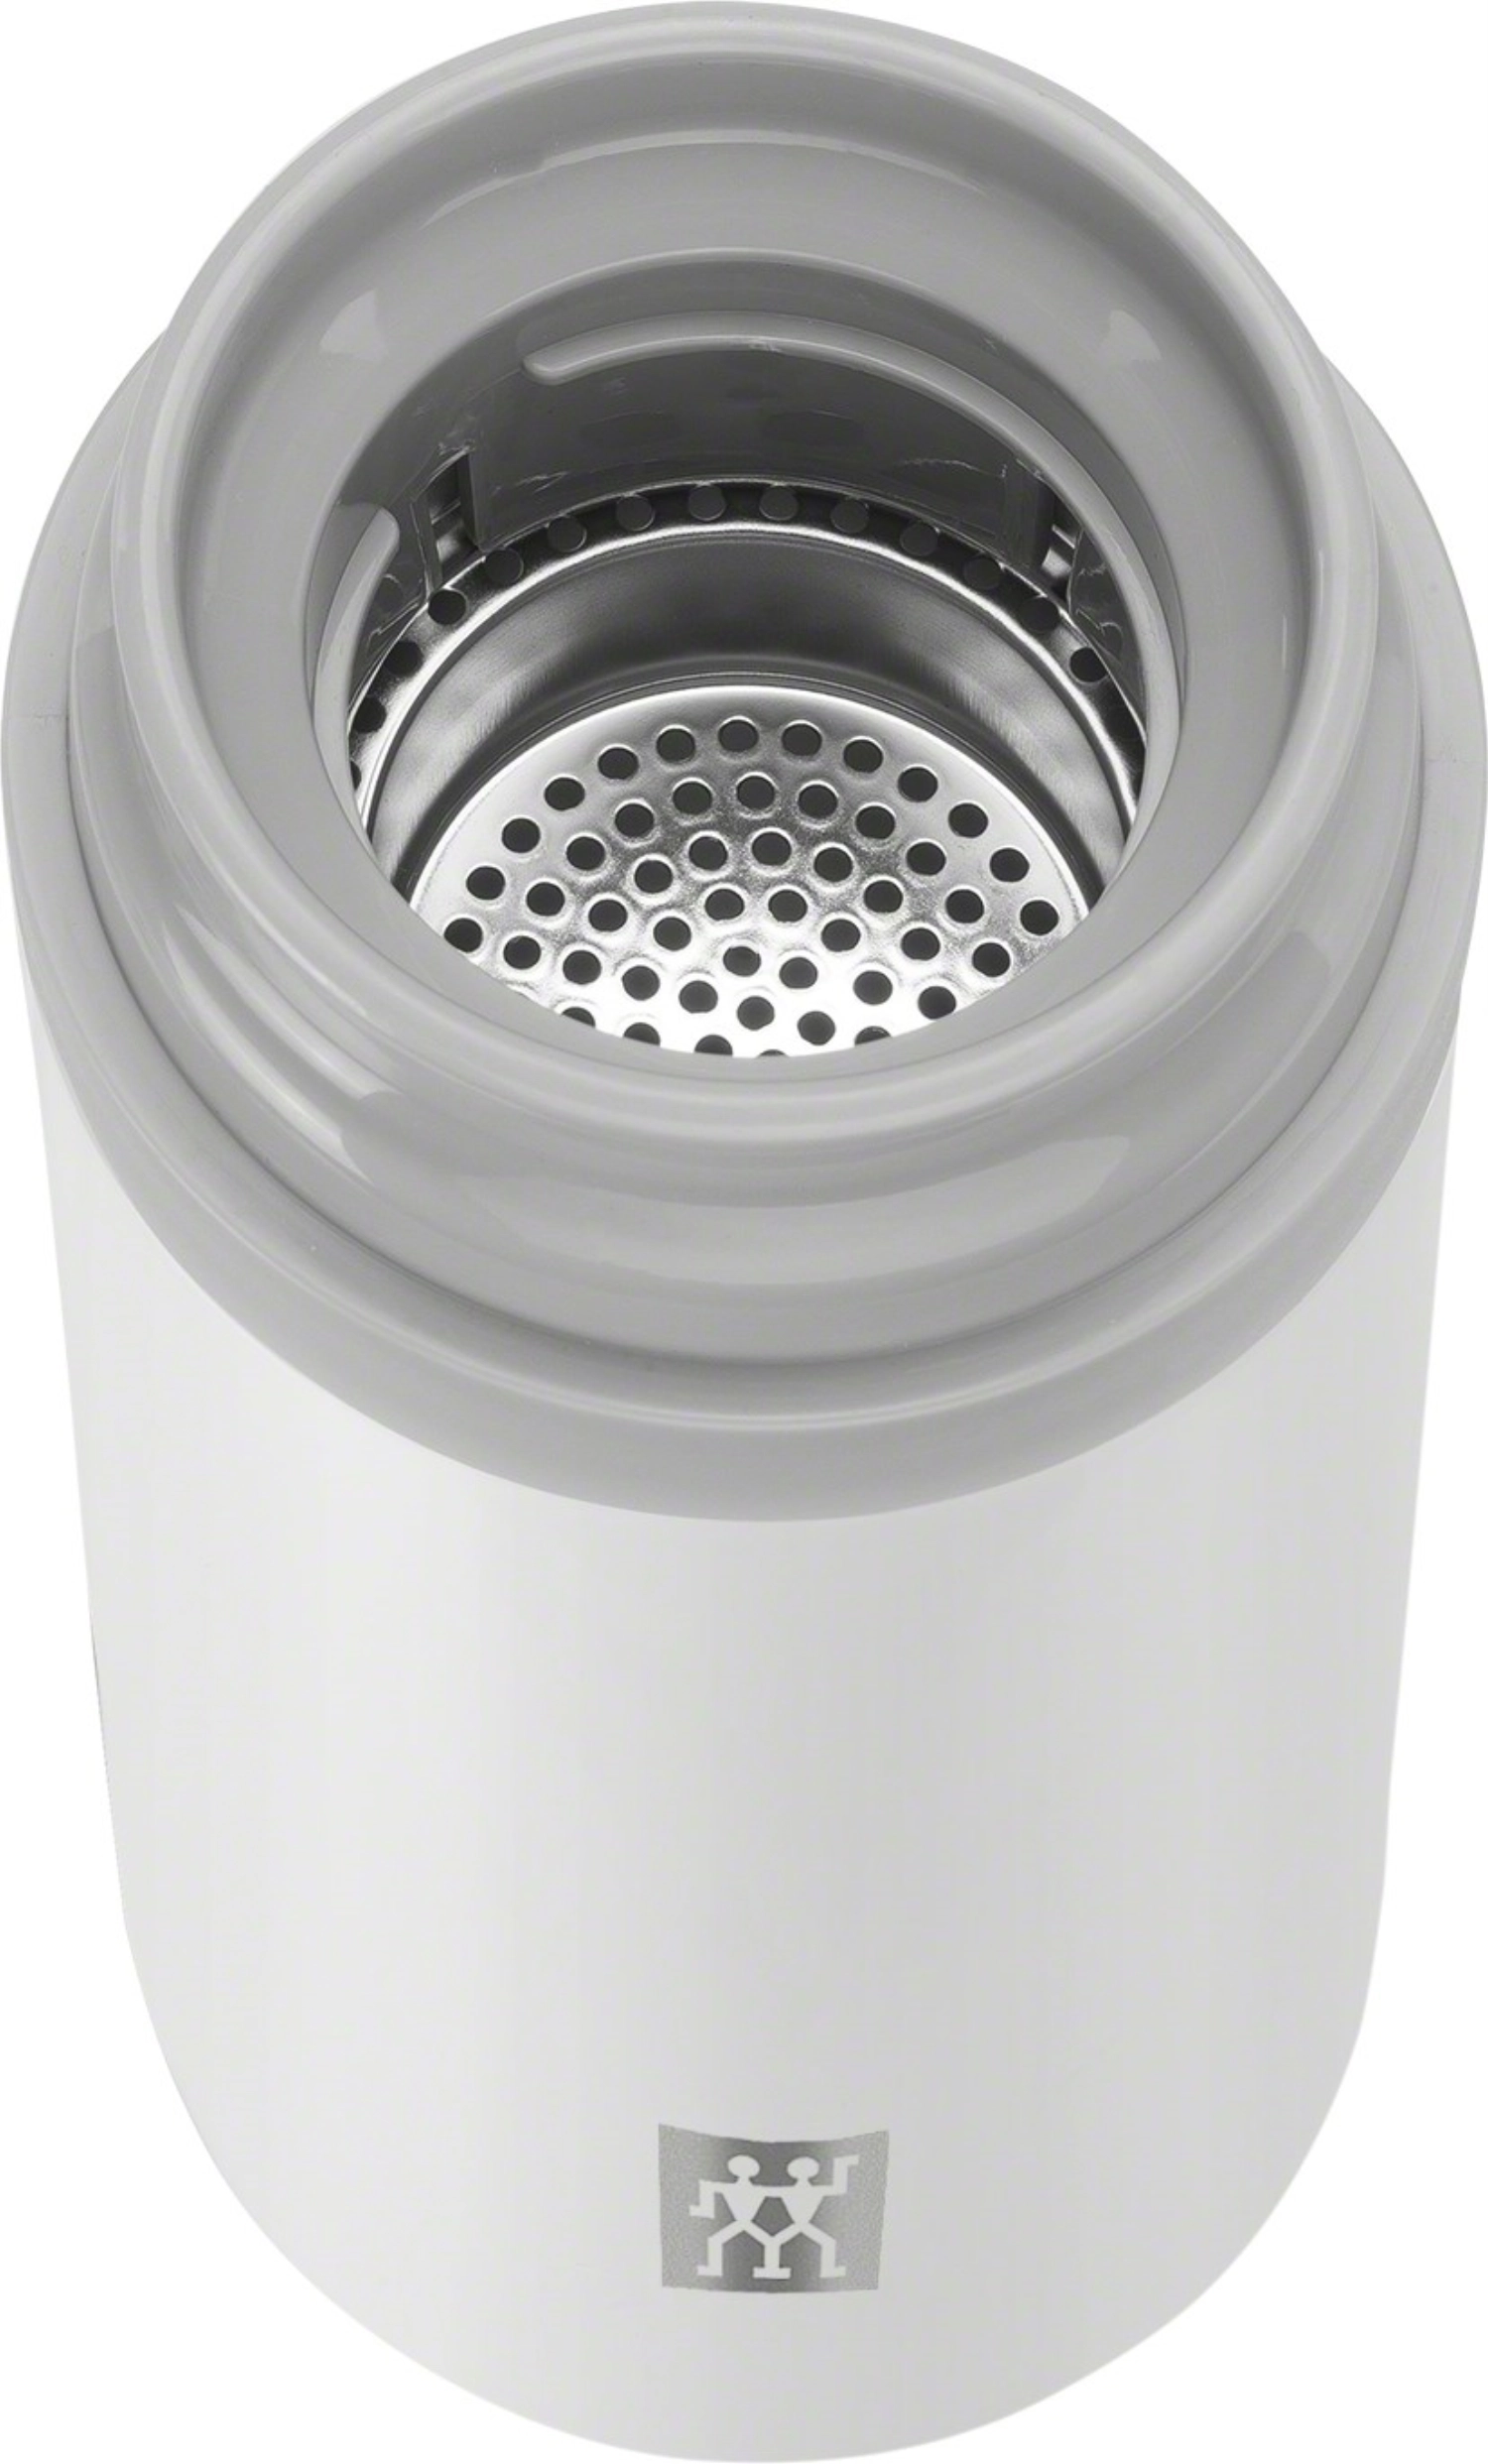 Thermo tea & fruit infuser bottle, 420 ml, argent-blanc